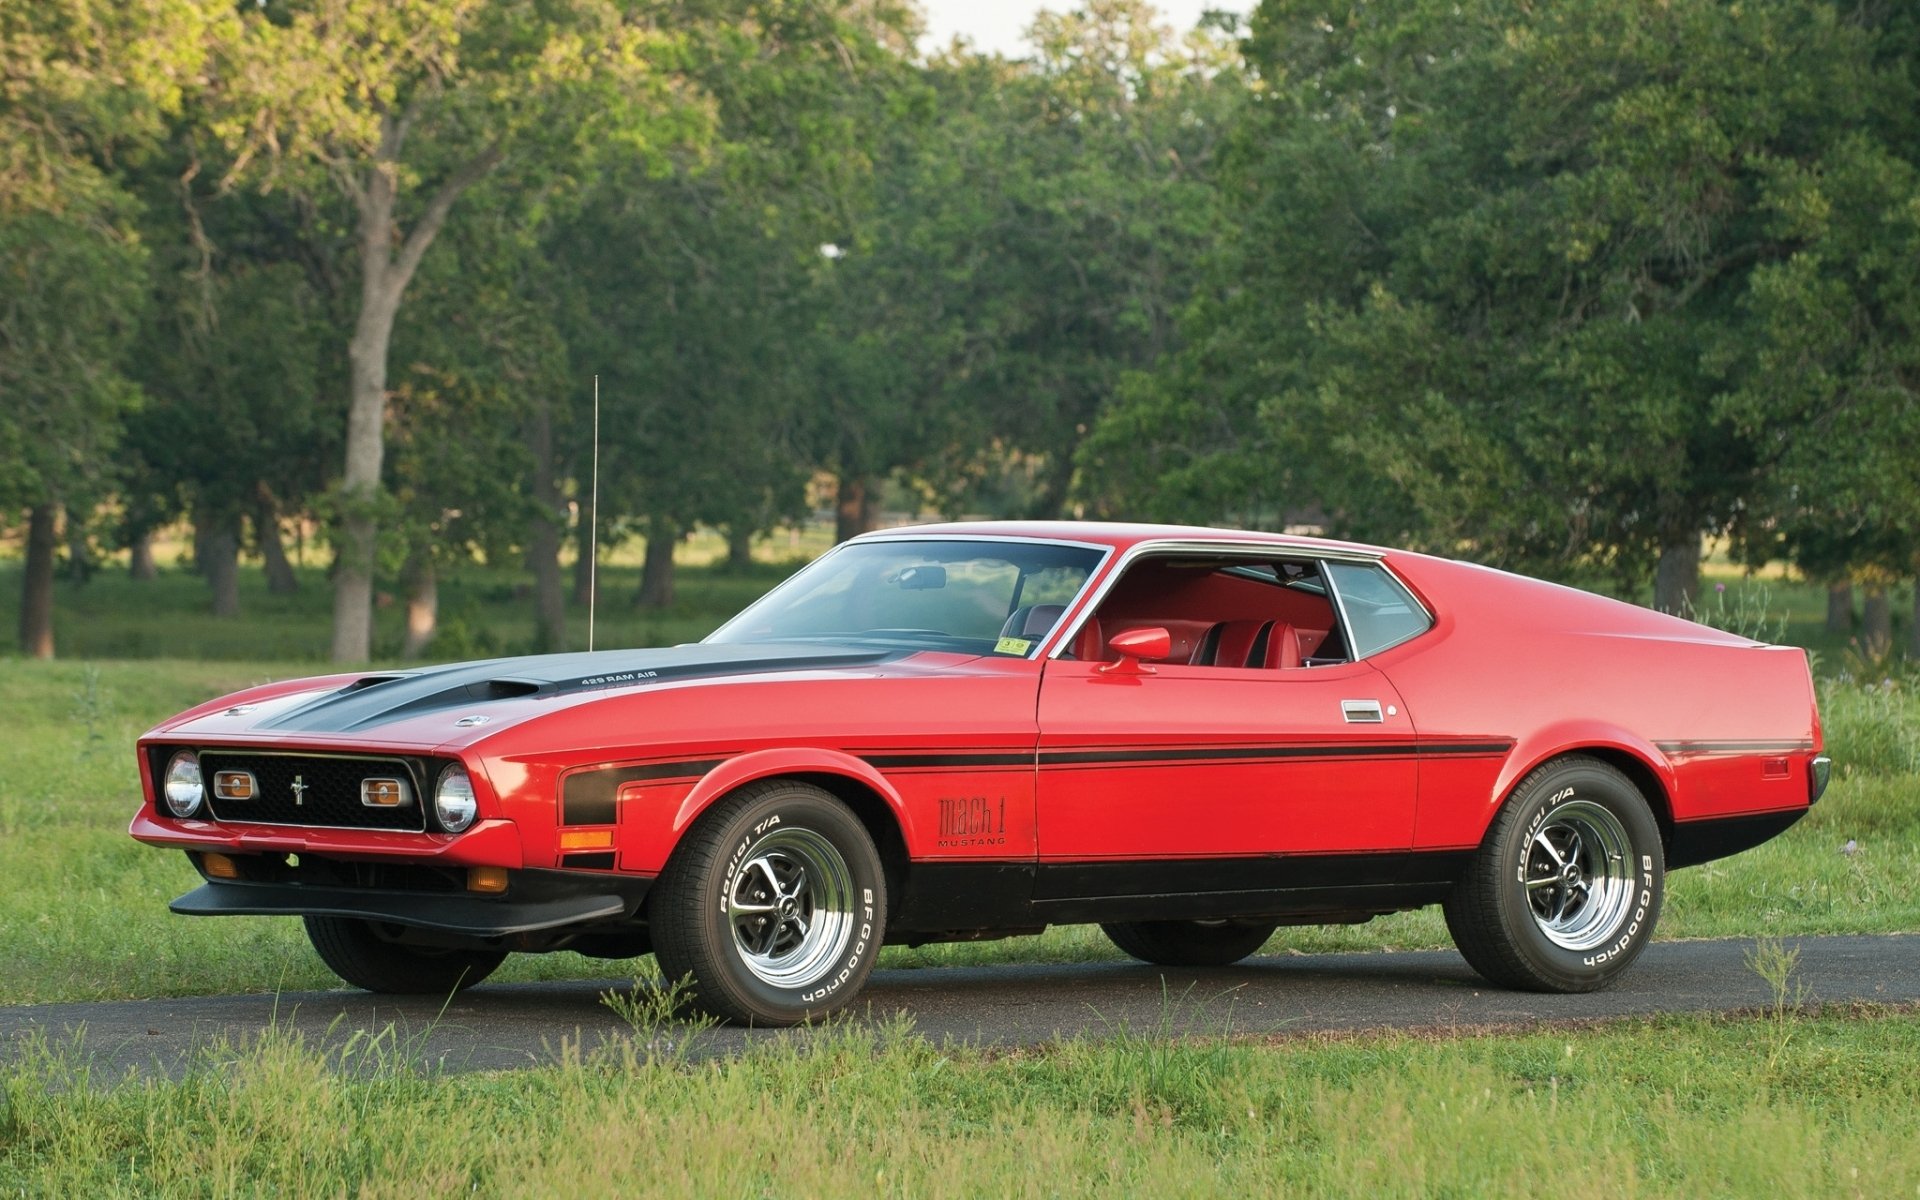 71 Mustang Mach 1 Full HD Wallpaper and Background Image | 1920x1200 ...